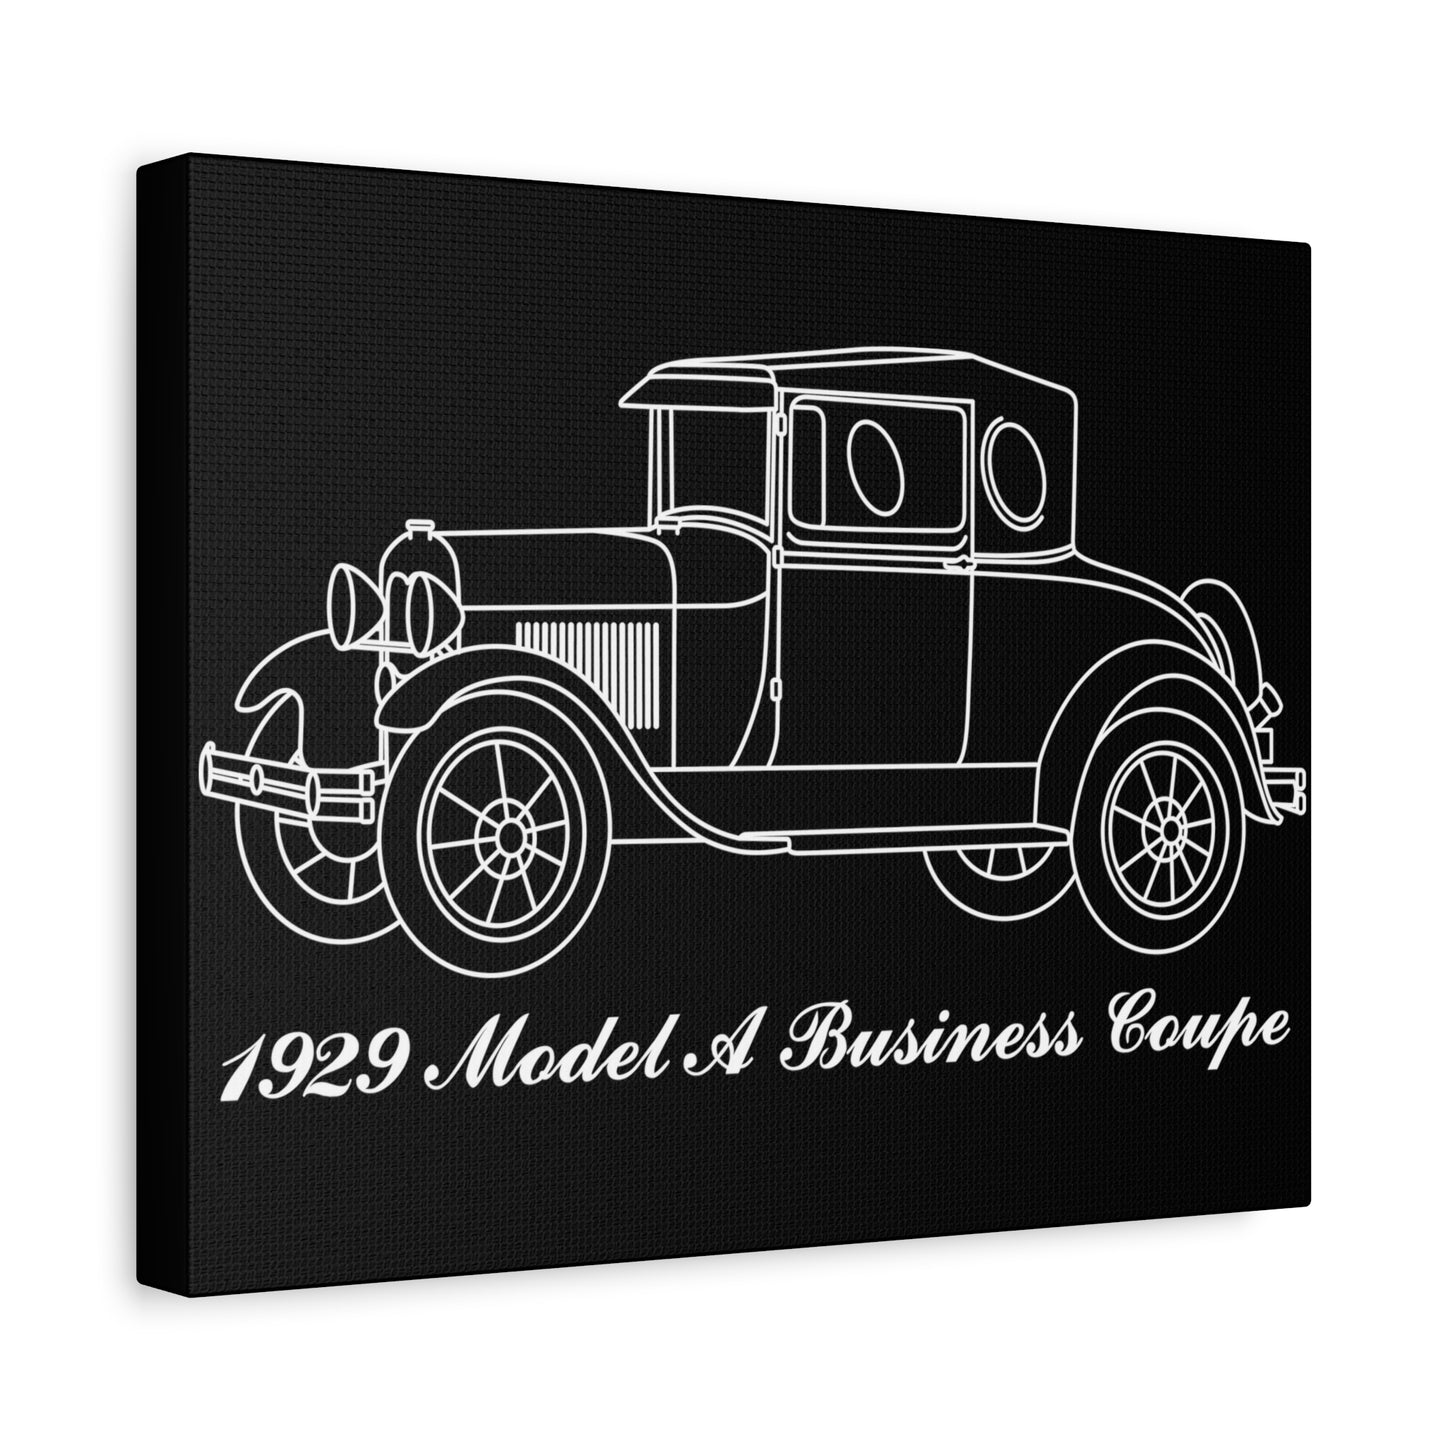 1929 Business Coupe Black Canvas Wall Art